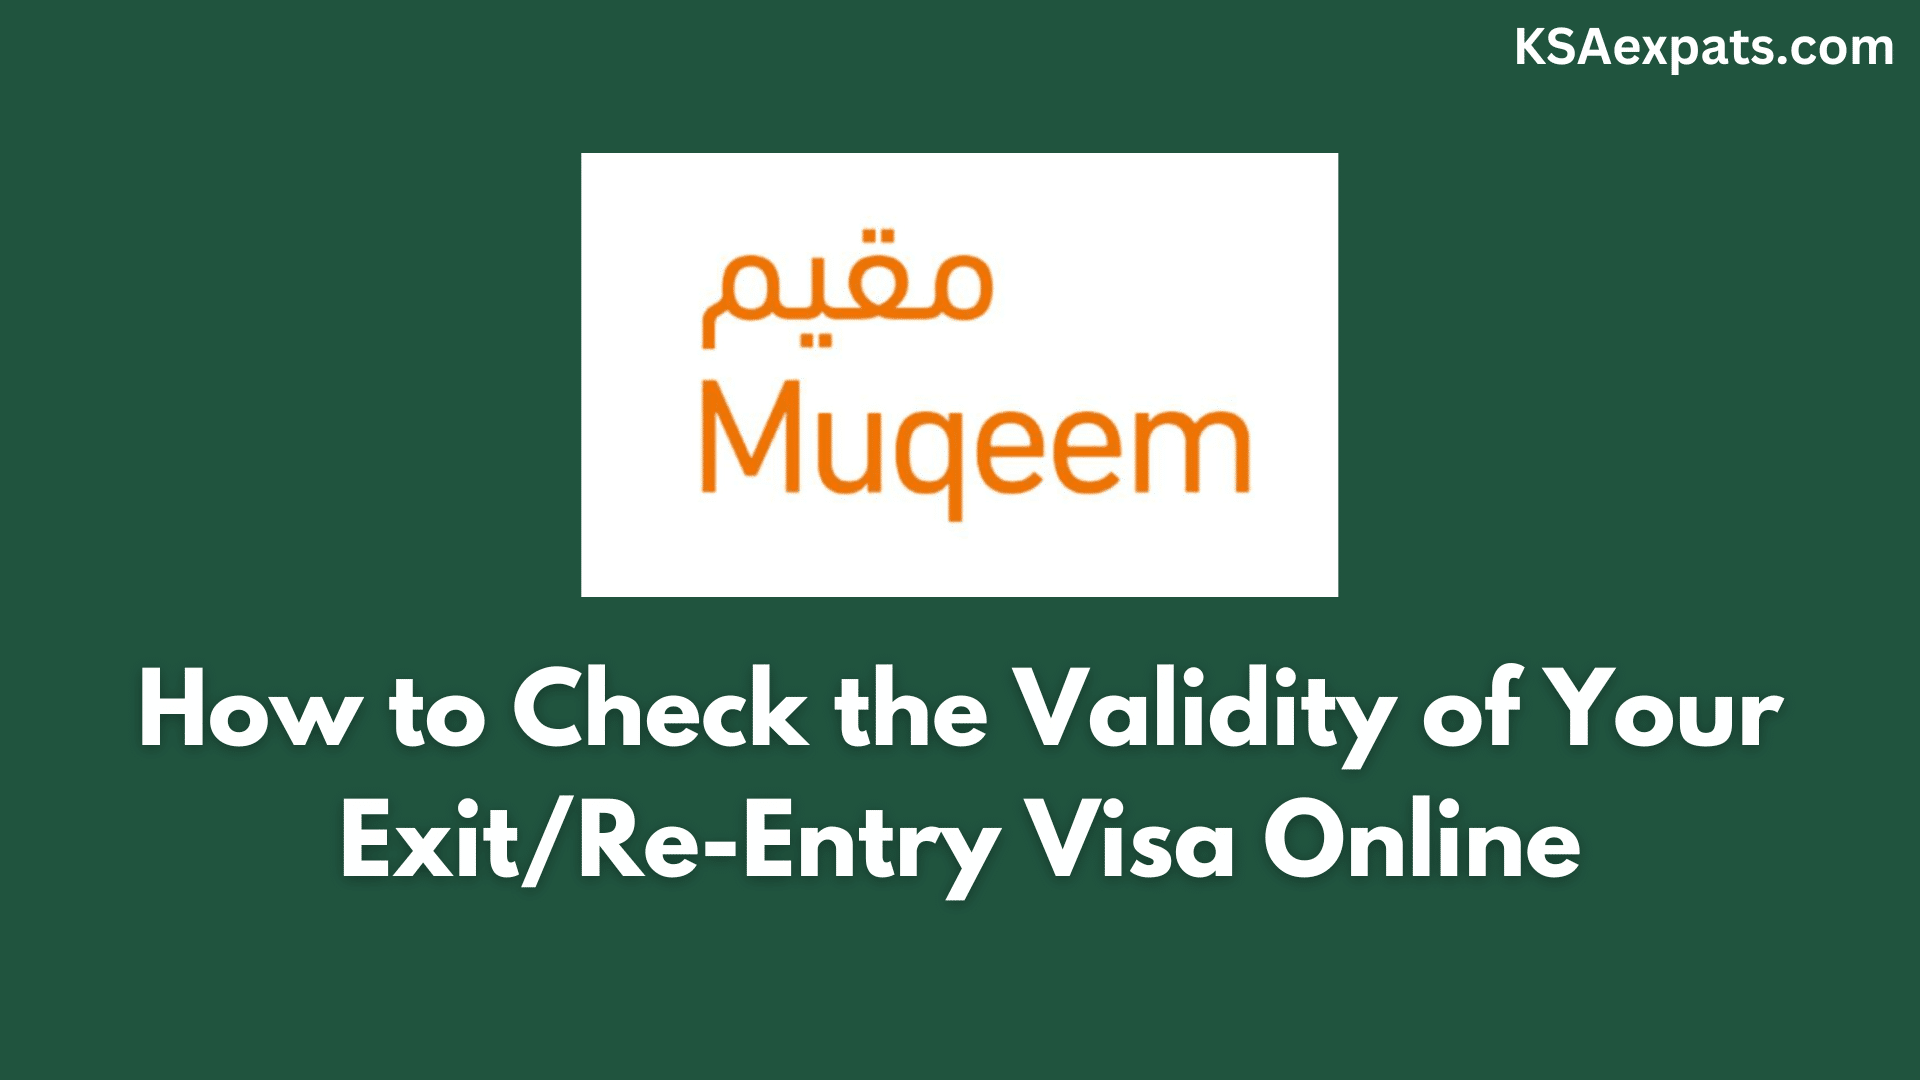 Muqeem- How to Check the Validity of Your ExitRe-Entry Visa Online